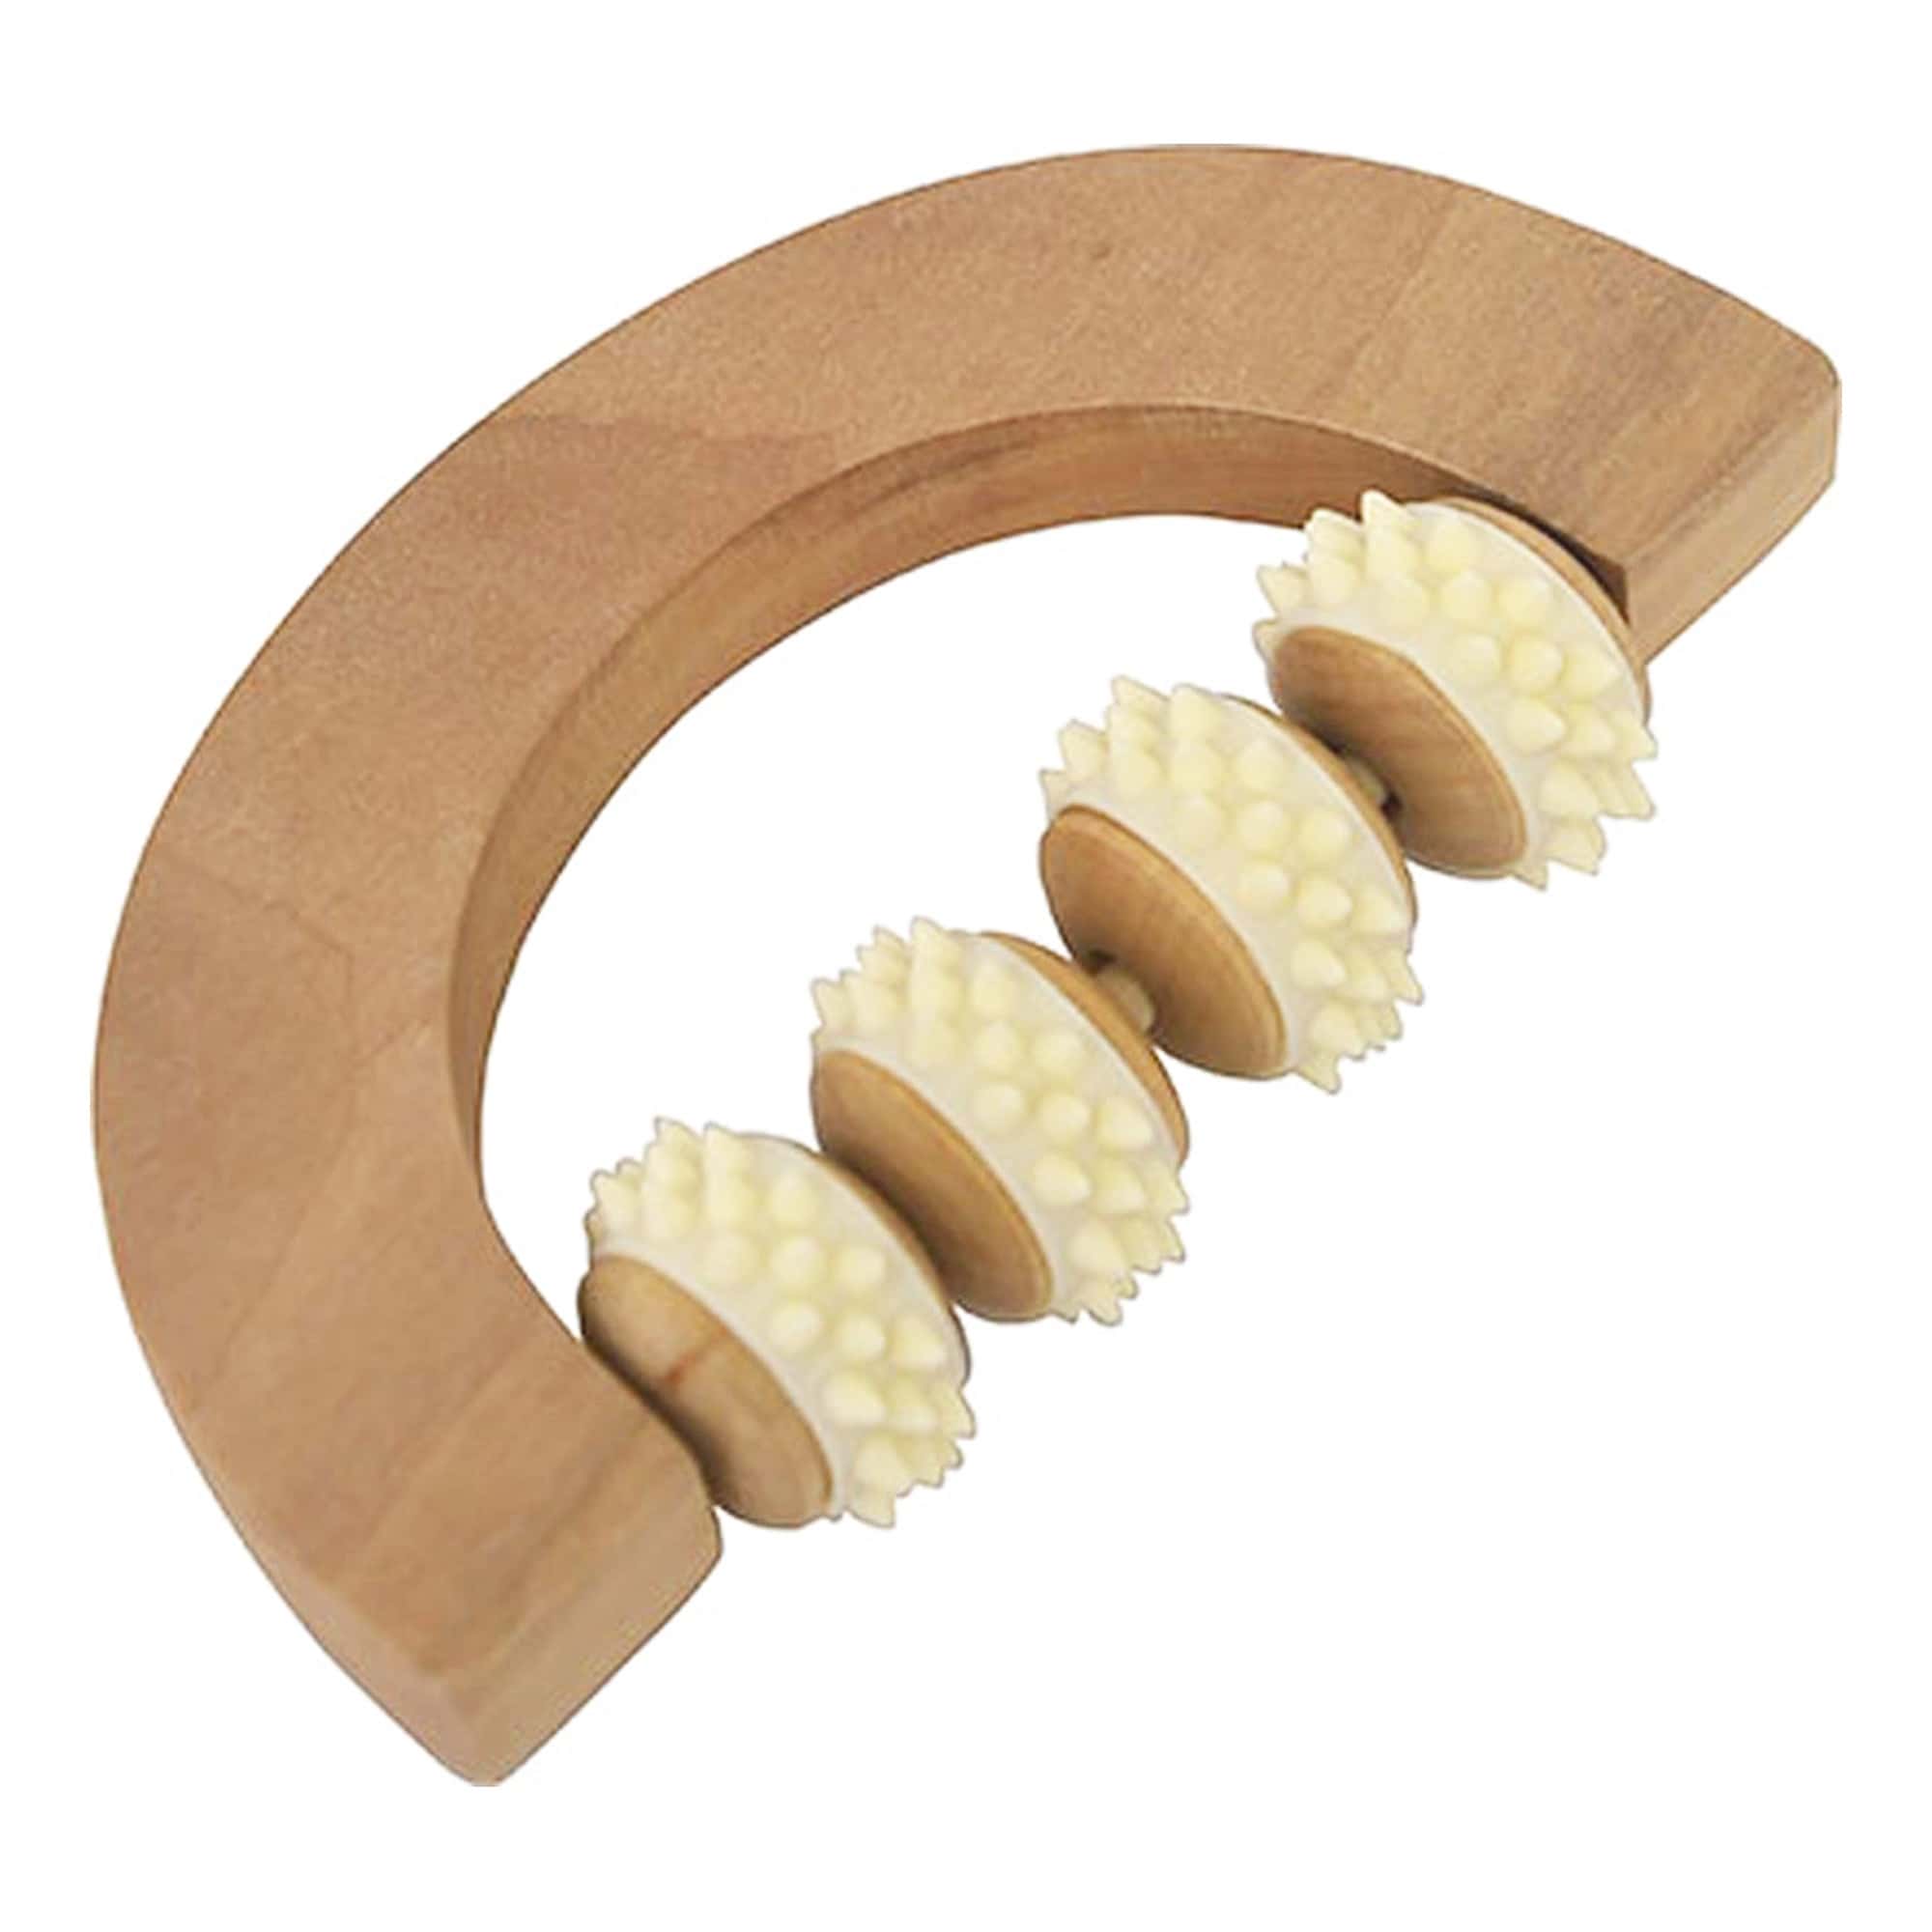 Ergonomic four-wheel natural wooden massage roller, ideal for relieving muscle tension and promoting relaxation.